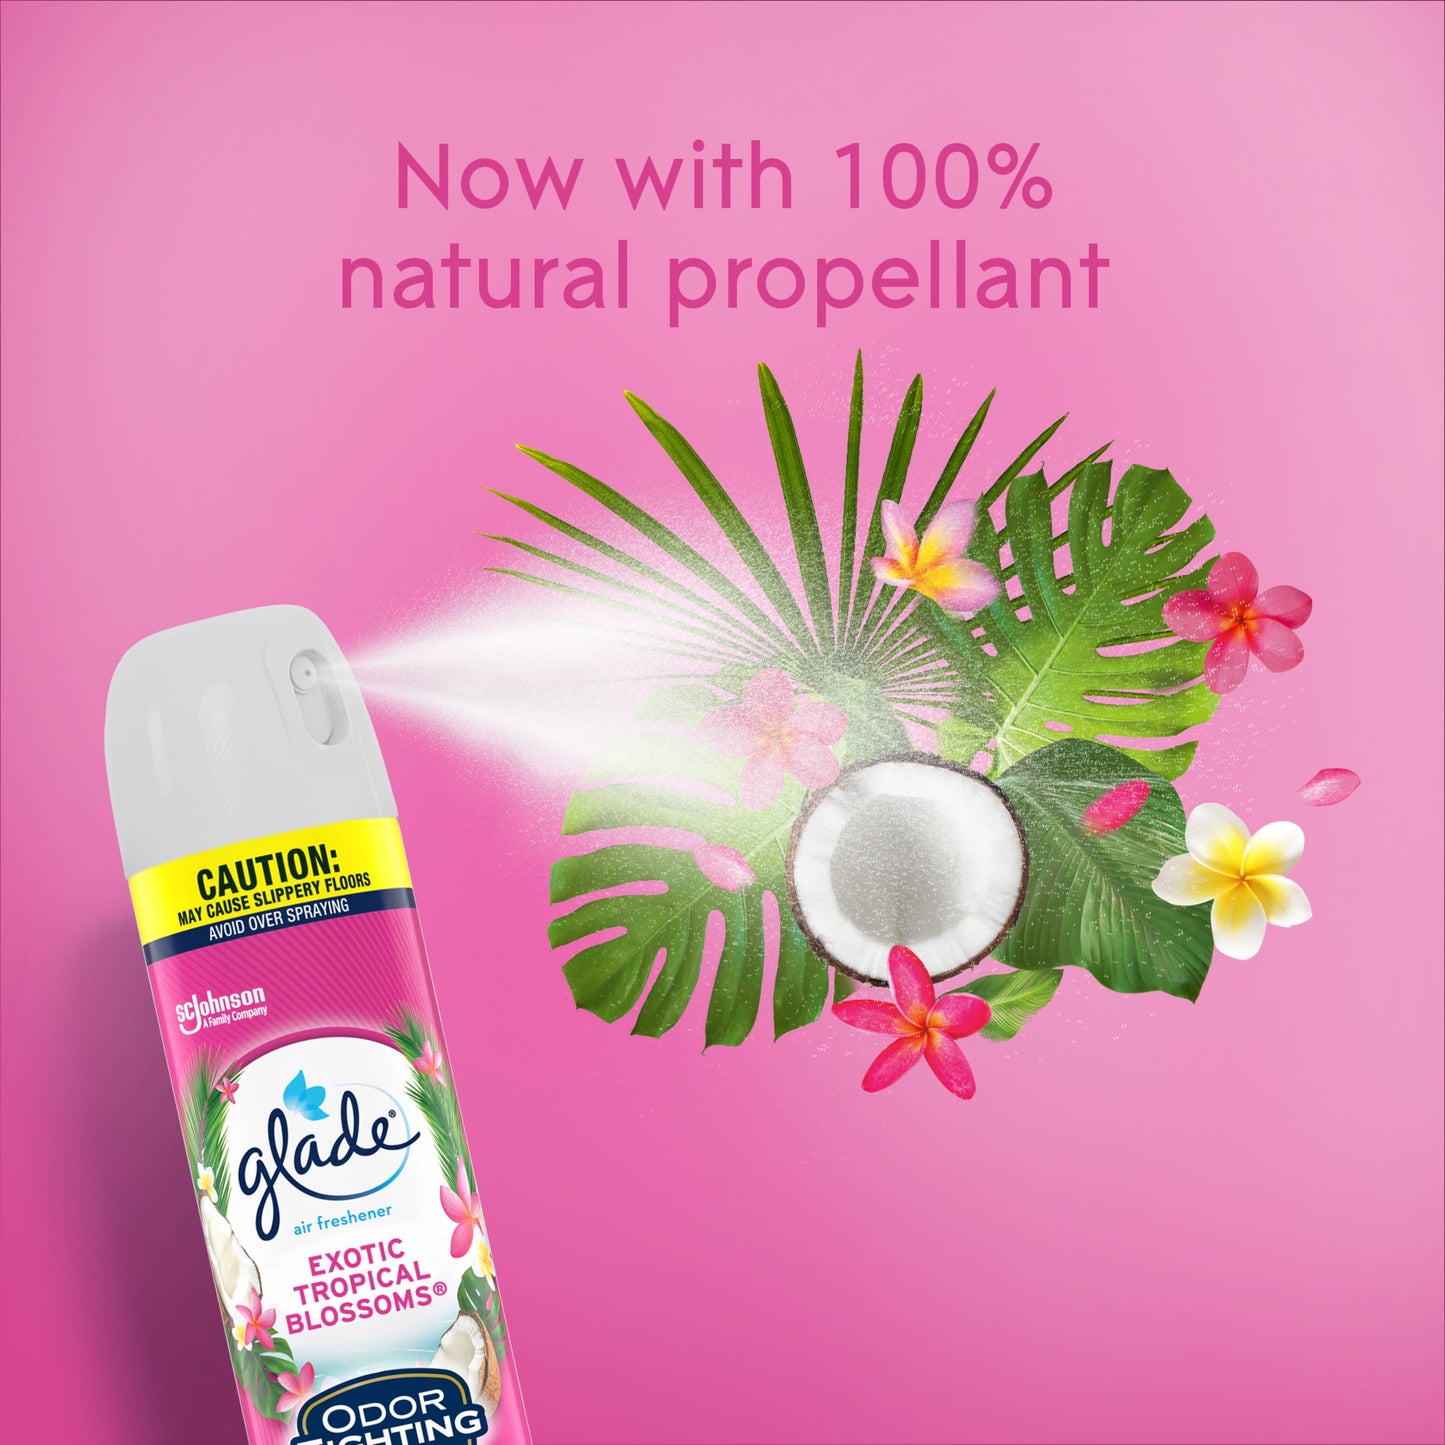 Glade Aerosol Spray, Air Freshener for Home, Exotic Tropical Blossoms Scent, Fragrance Infused with Essential Oils, Invigorating and Refreshing, with 100% Natural Propellent, 8.3 oz